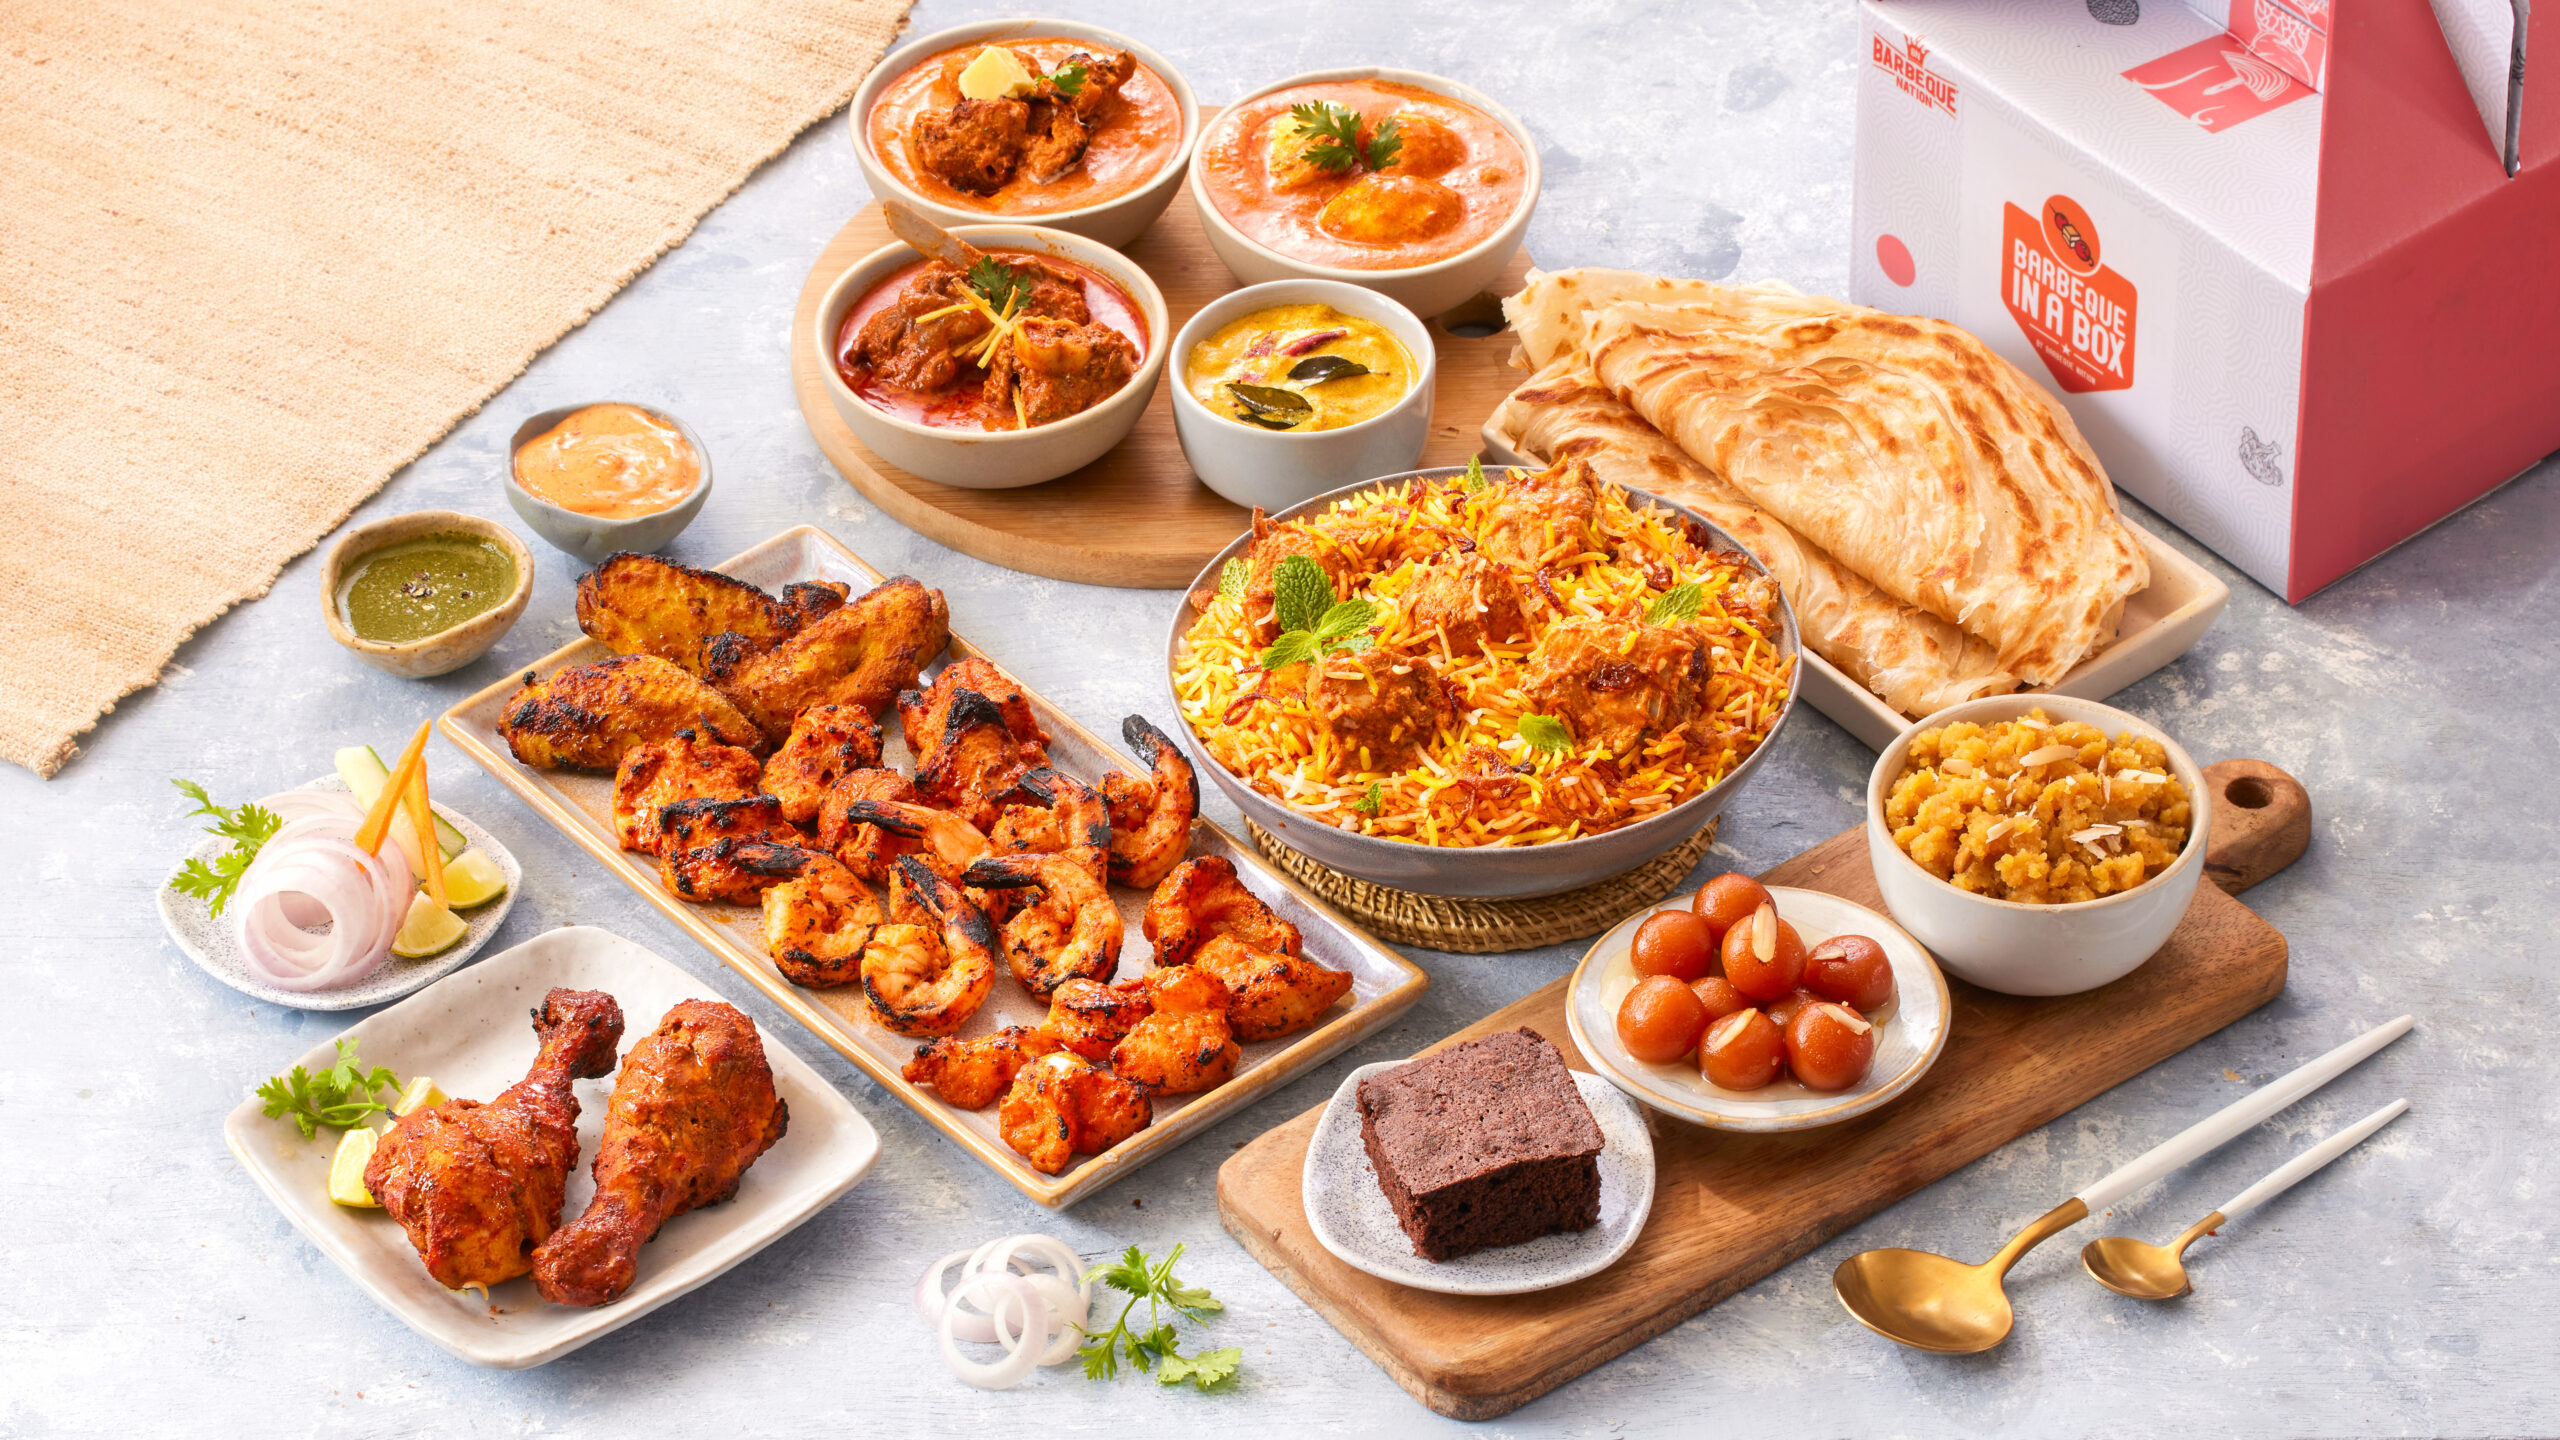 Barbeque Nation’s buffet gets home delivered in a box